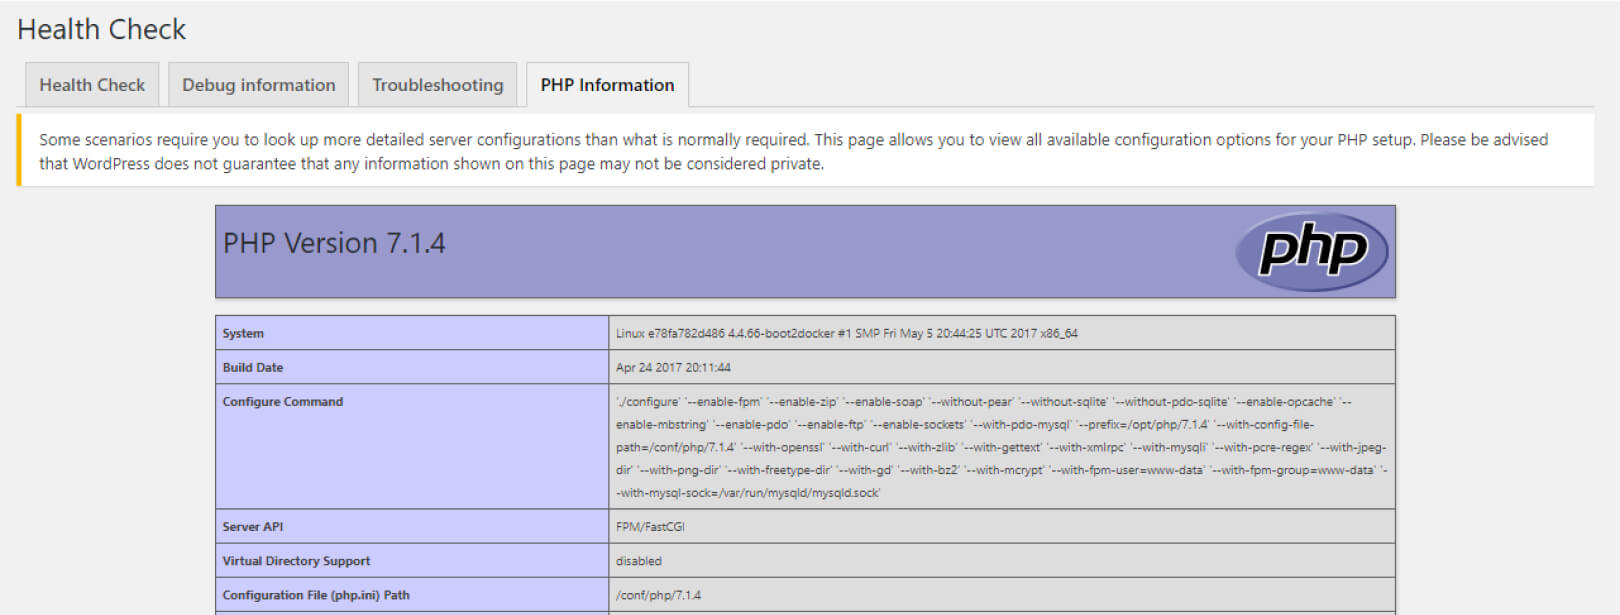 PHP Information